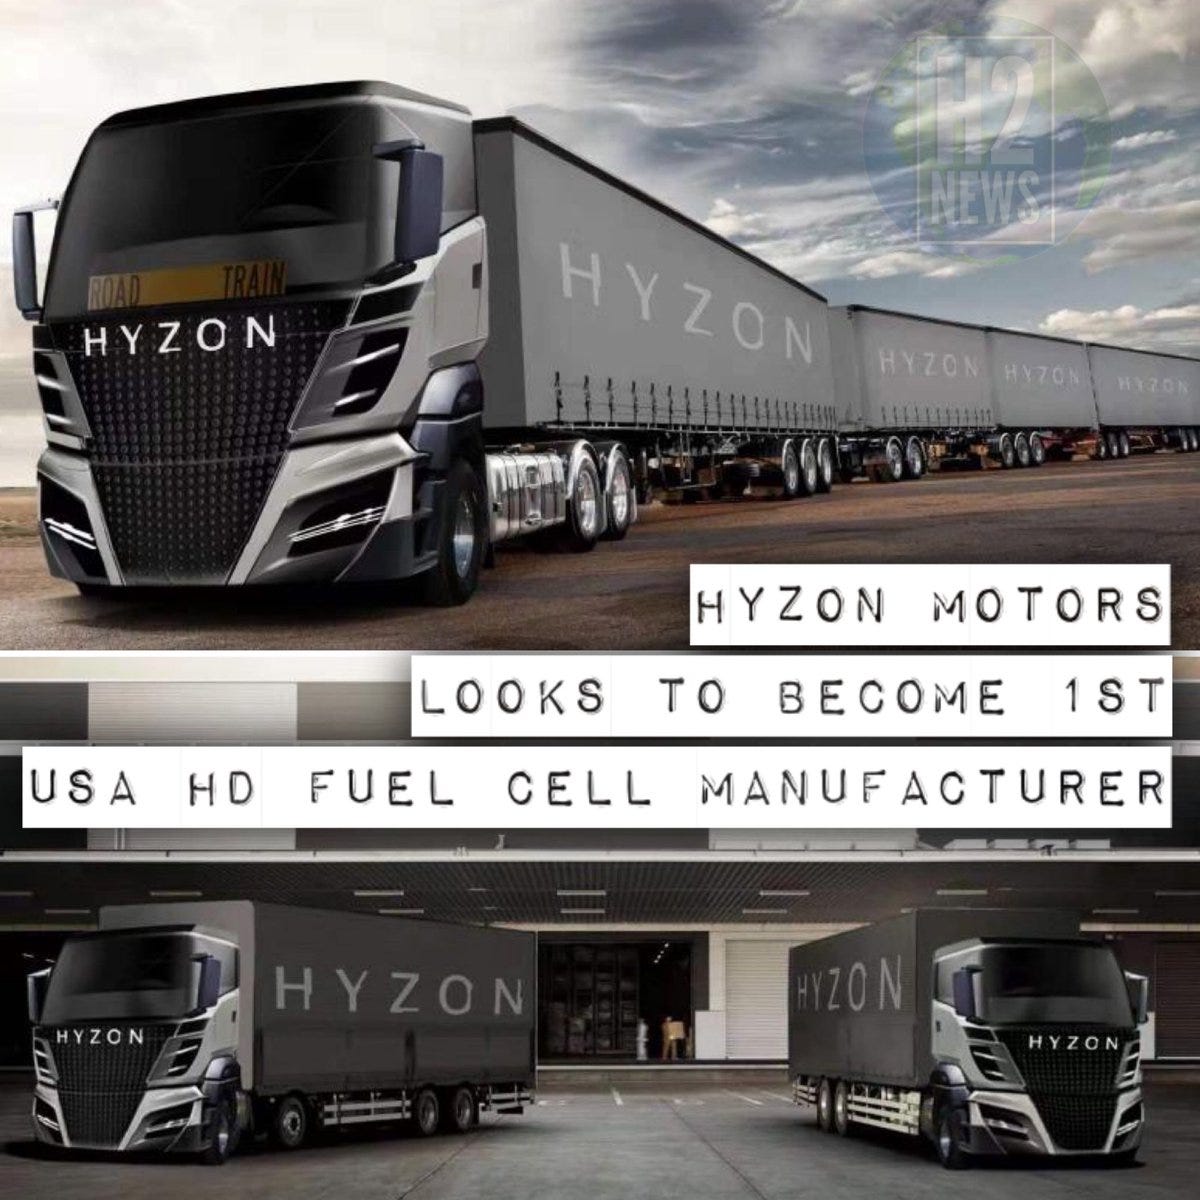 H2 & Fuel Cell News🌎 on Twitter: "Hyzon Motors wants to become the first  USA manufacturer of PEM #fuelcell modules exceeding 100kW for HD trucks -  New integration facility in New York. “